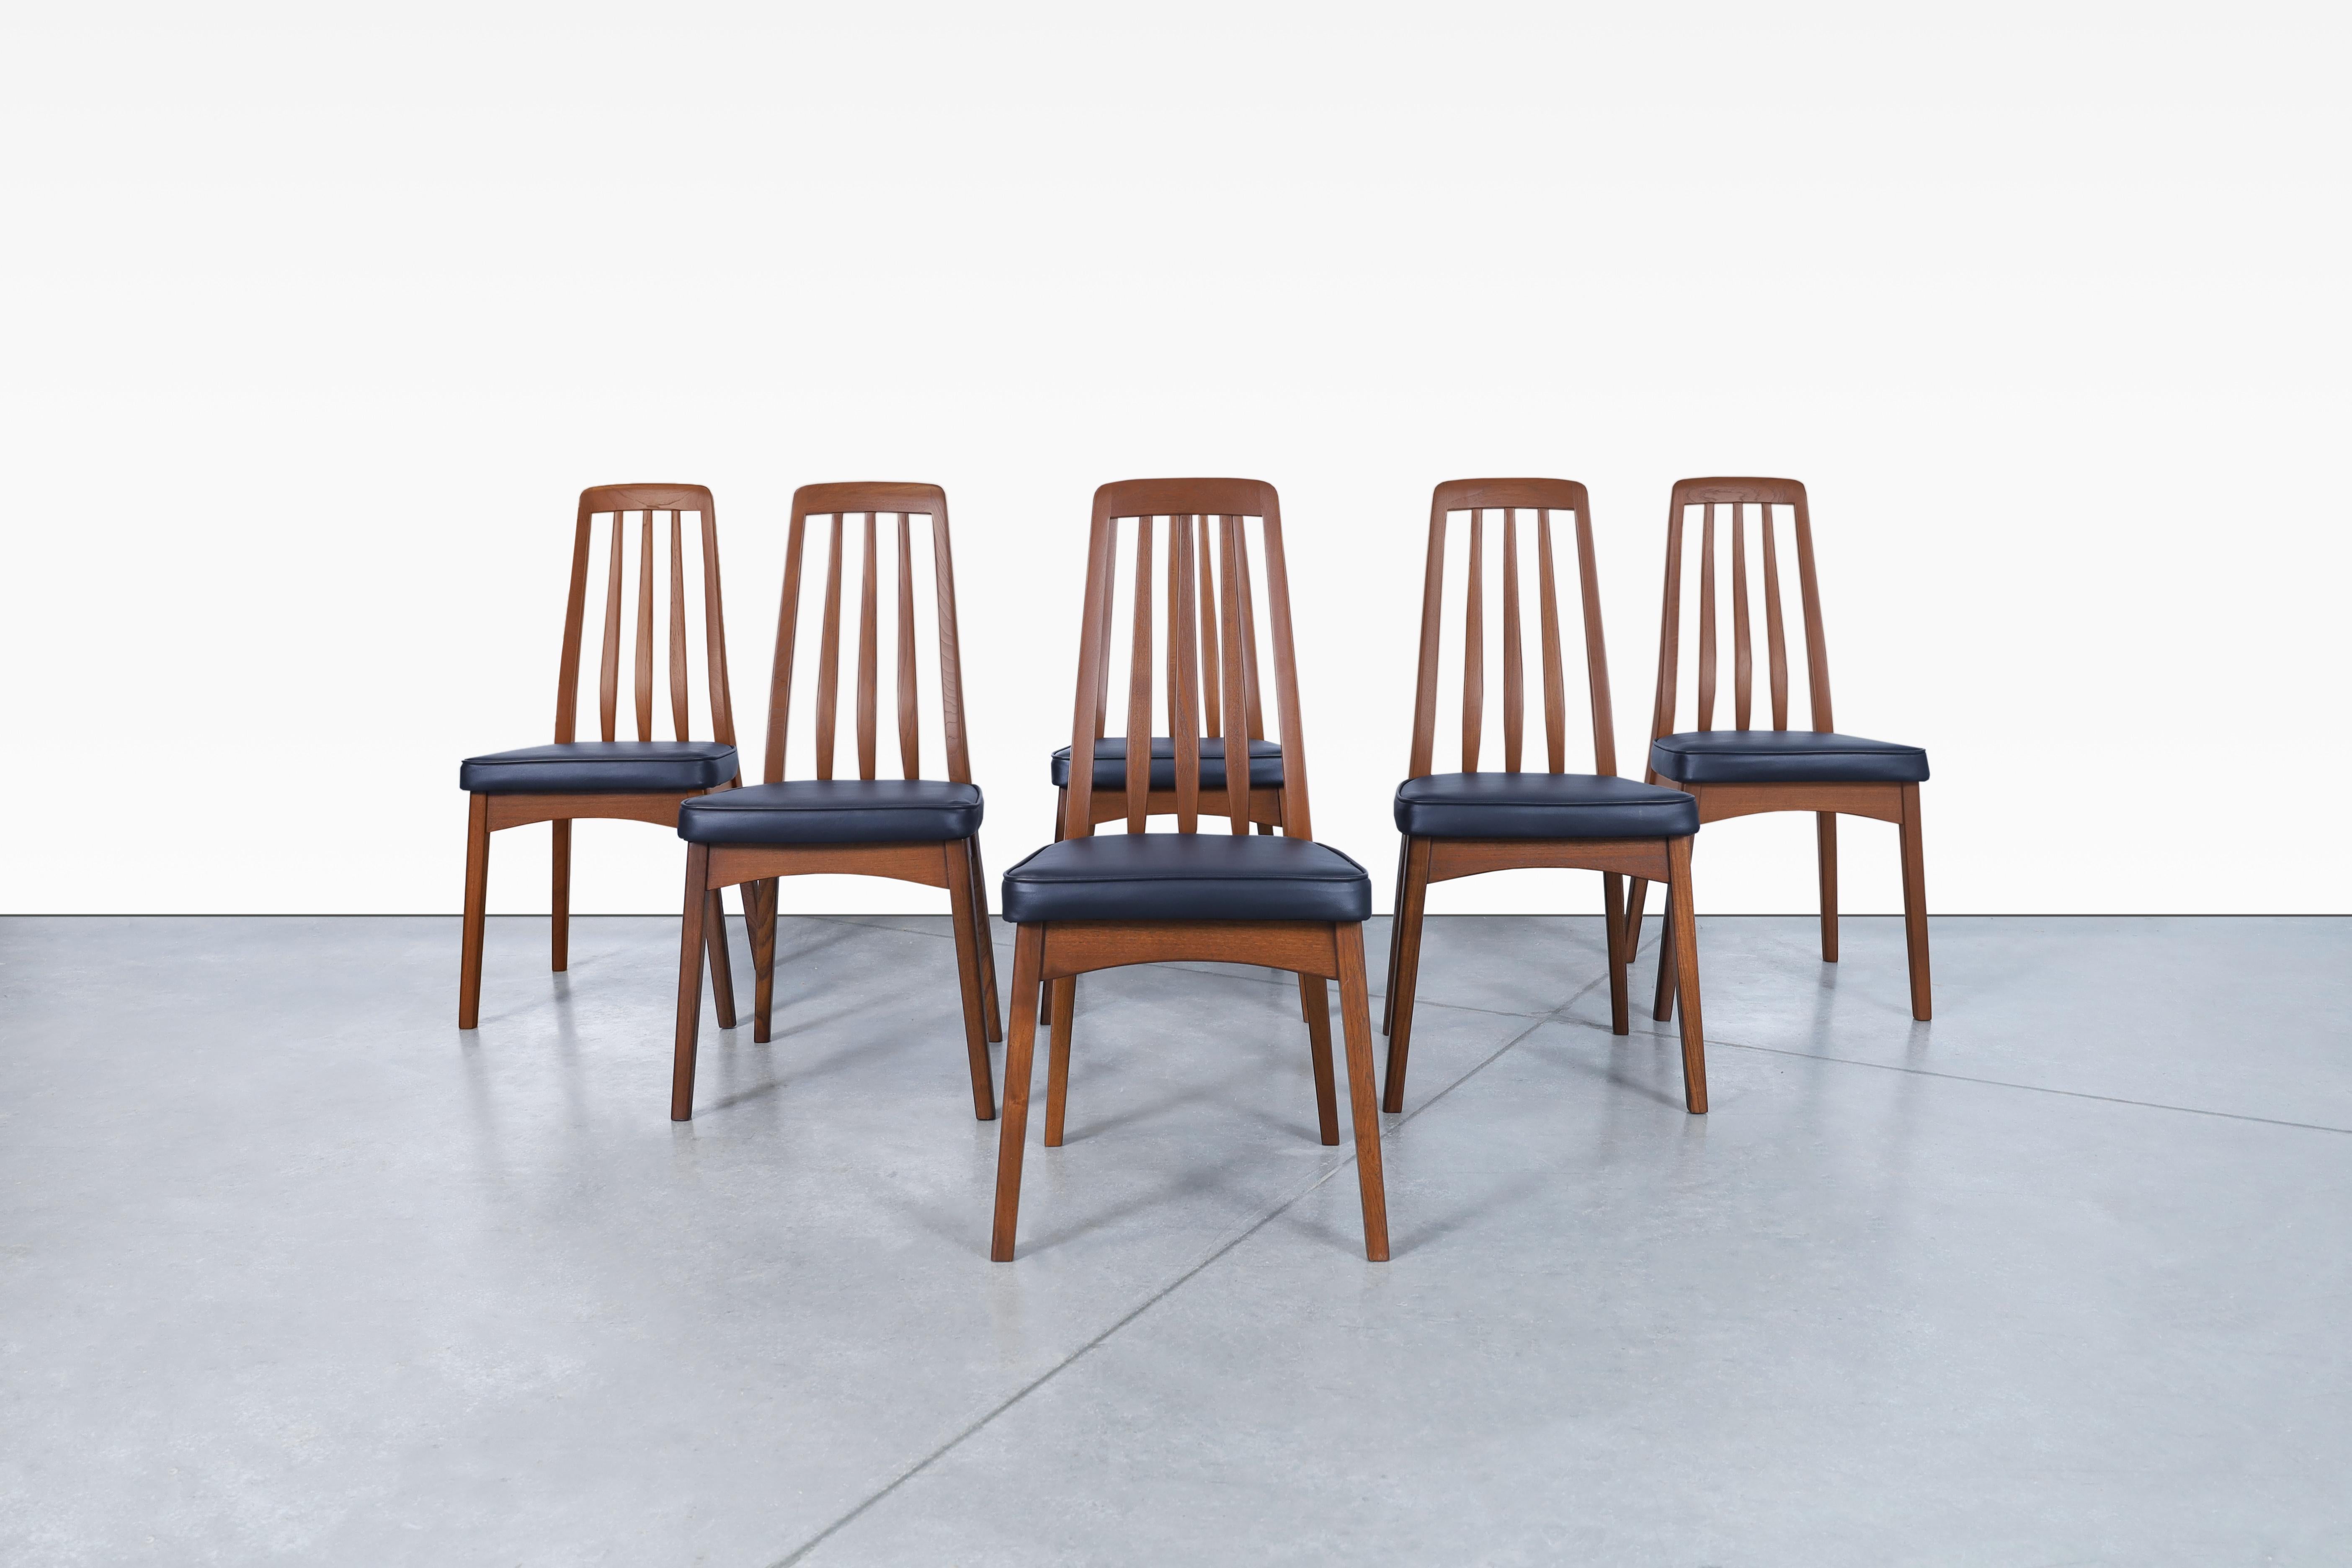 Fabulous Mid-Century Modern walnut dining chairs, circa 1960s. These chairs have an ergonomic design that focuses on the rest needs of the user. The frame of each chair has been constructed from solid walnut wood and has elegant construction lines